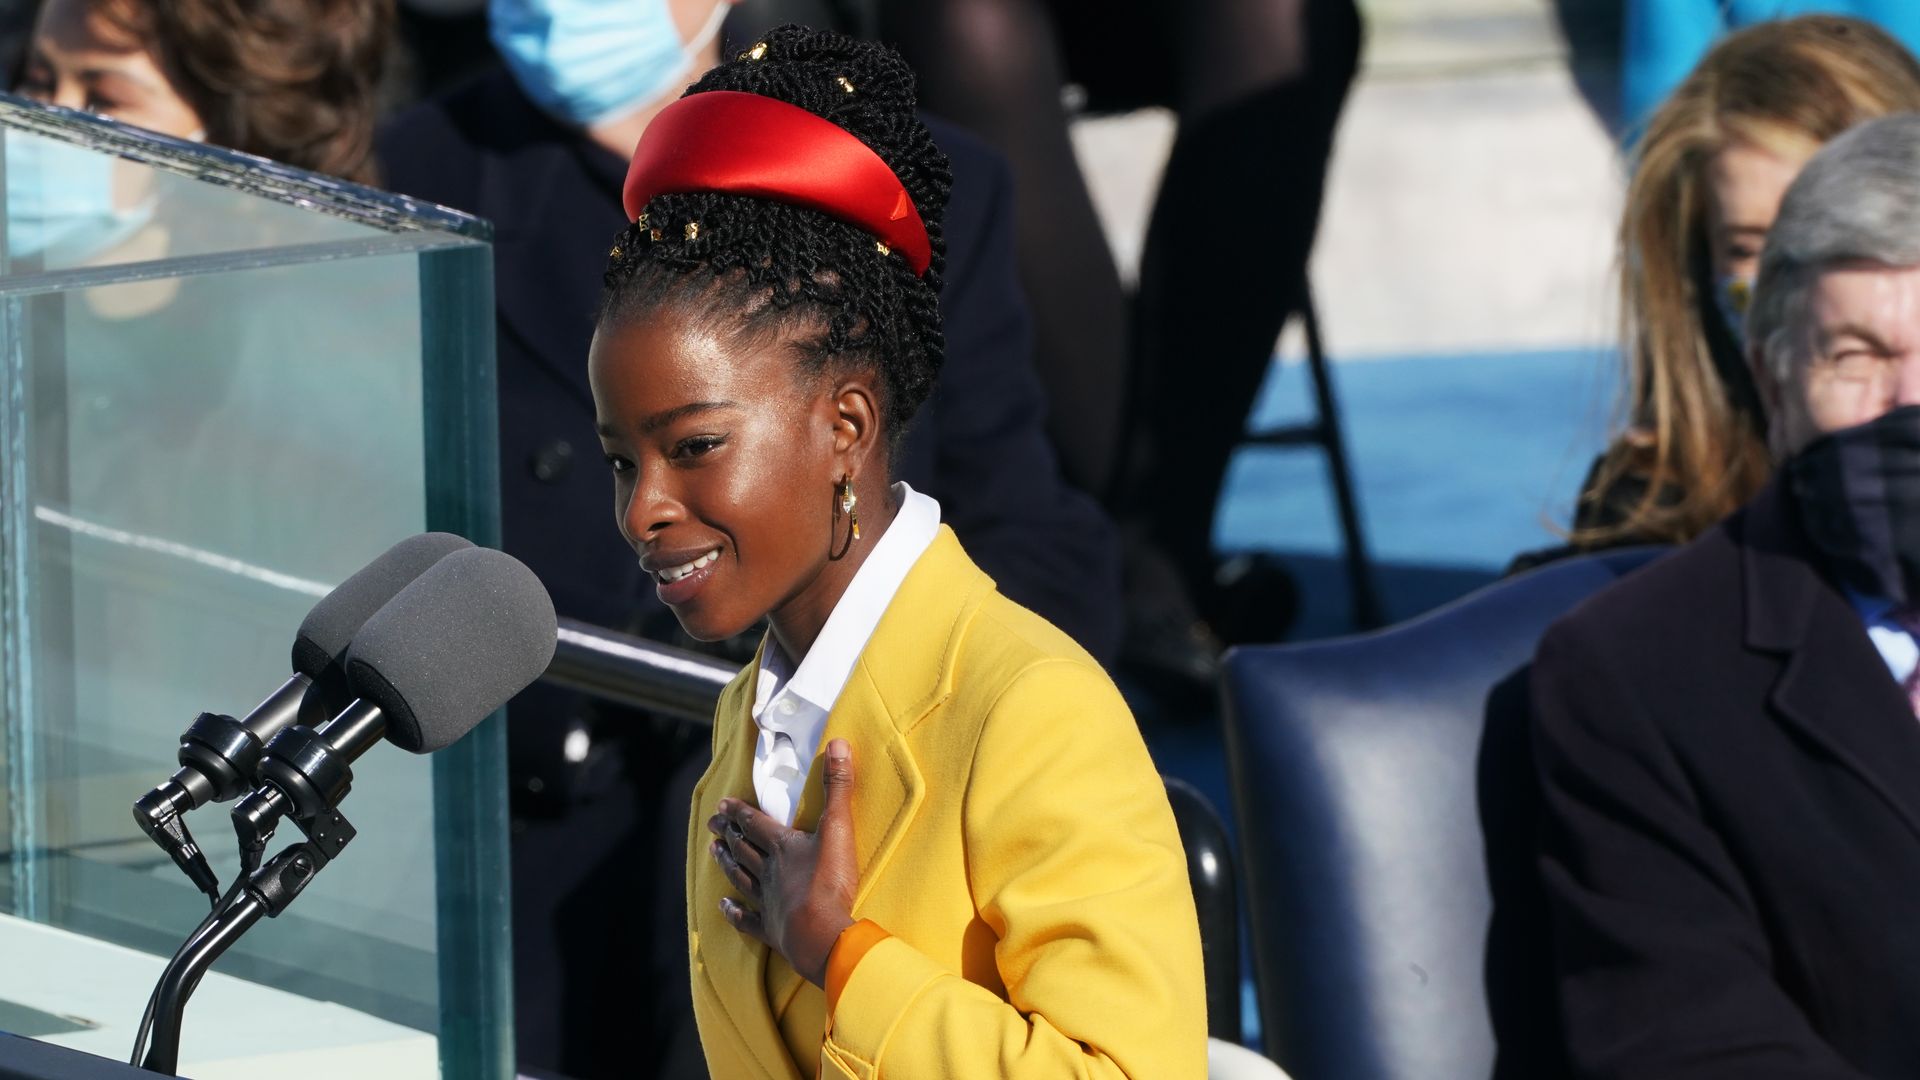 Inaugural poet Amanda Gorman delivered a poem during the inauguration of U.S. President Joe Biden on the West Front of the U.S. Capitol on January 20, 2021 in Washington, DC. 